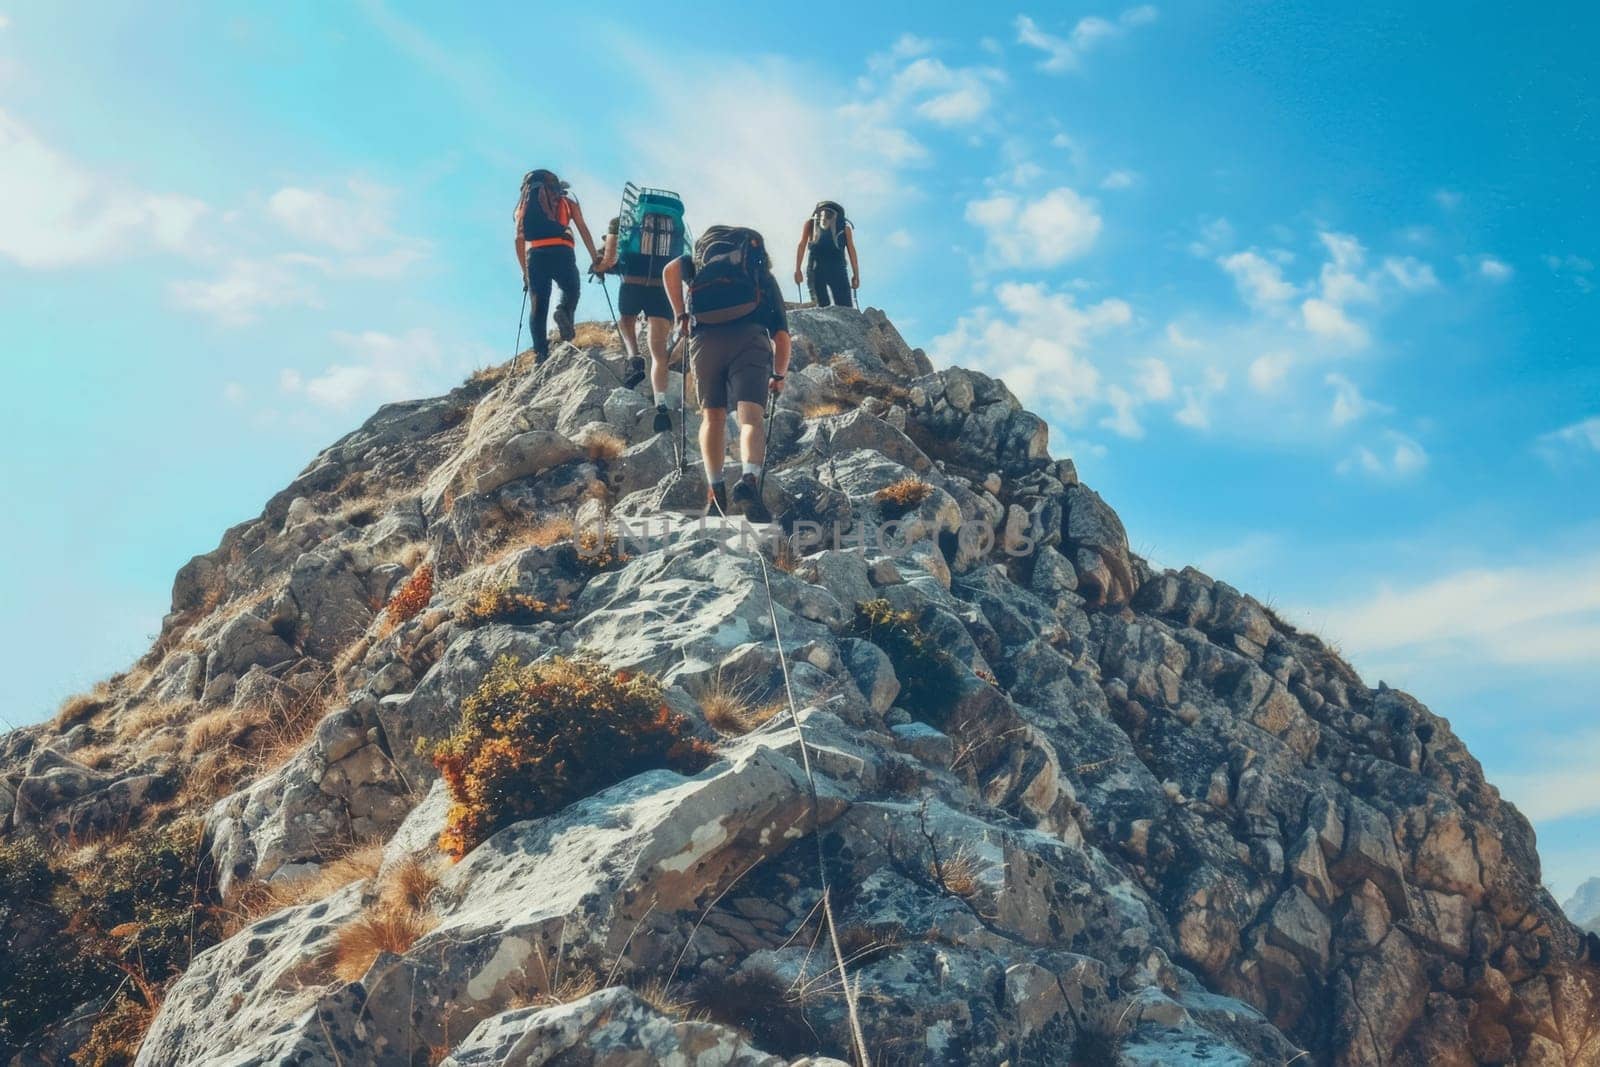 A group of friends reach the summit of a rugged mountain peak under a clear blue sky, showcasing the spirit of adventure and teamwork